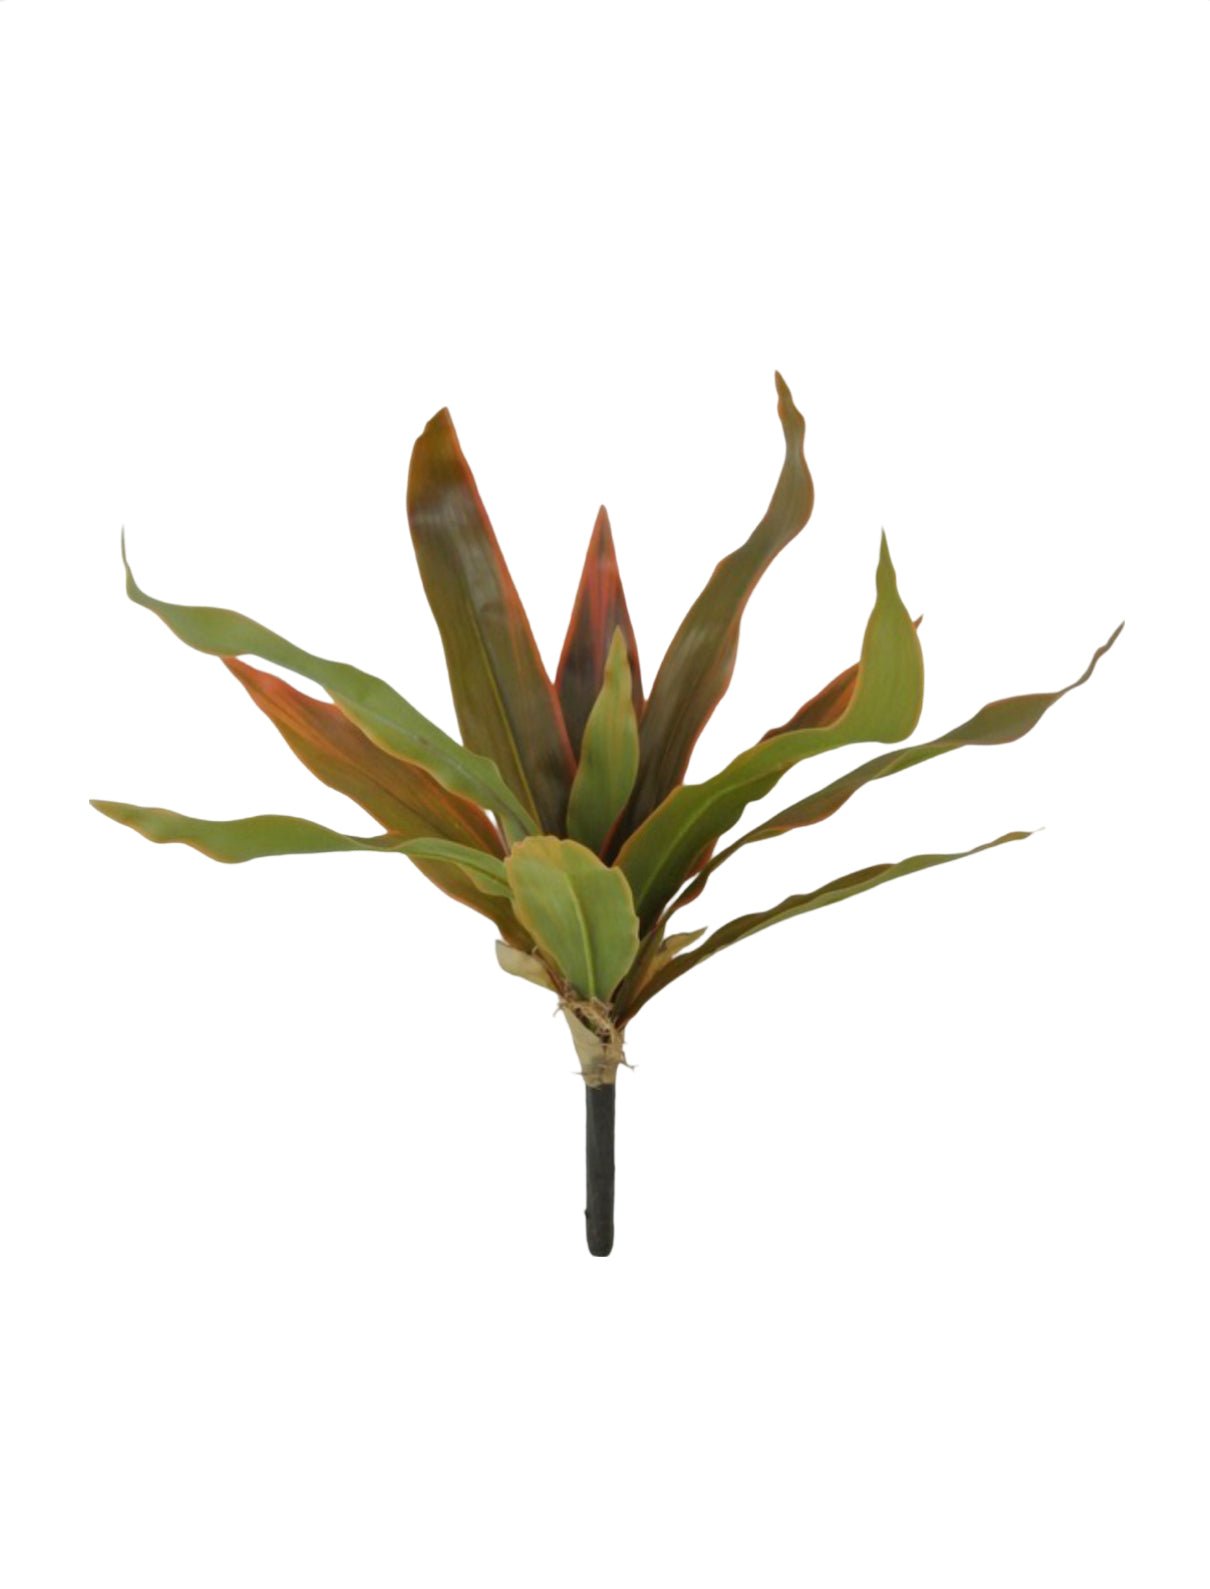 Artificial, tropical, red dracaena container bush - Greenery Marketgreenery81616